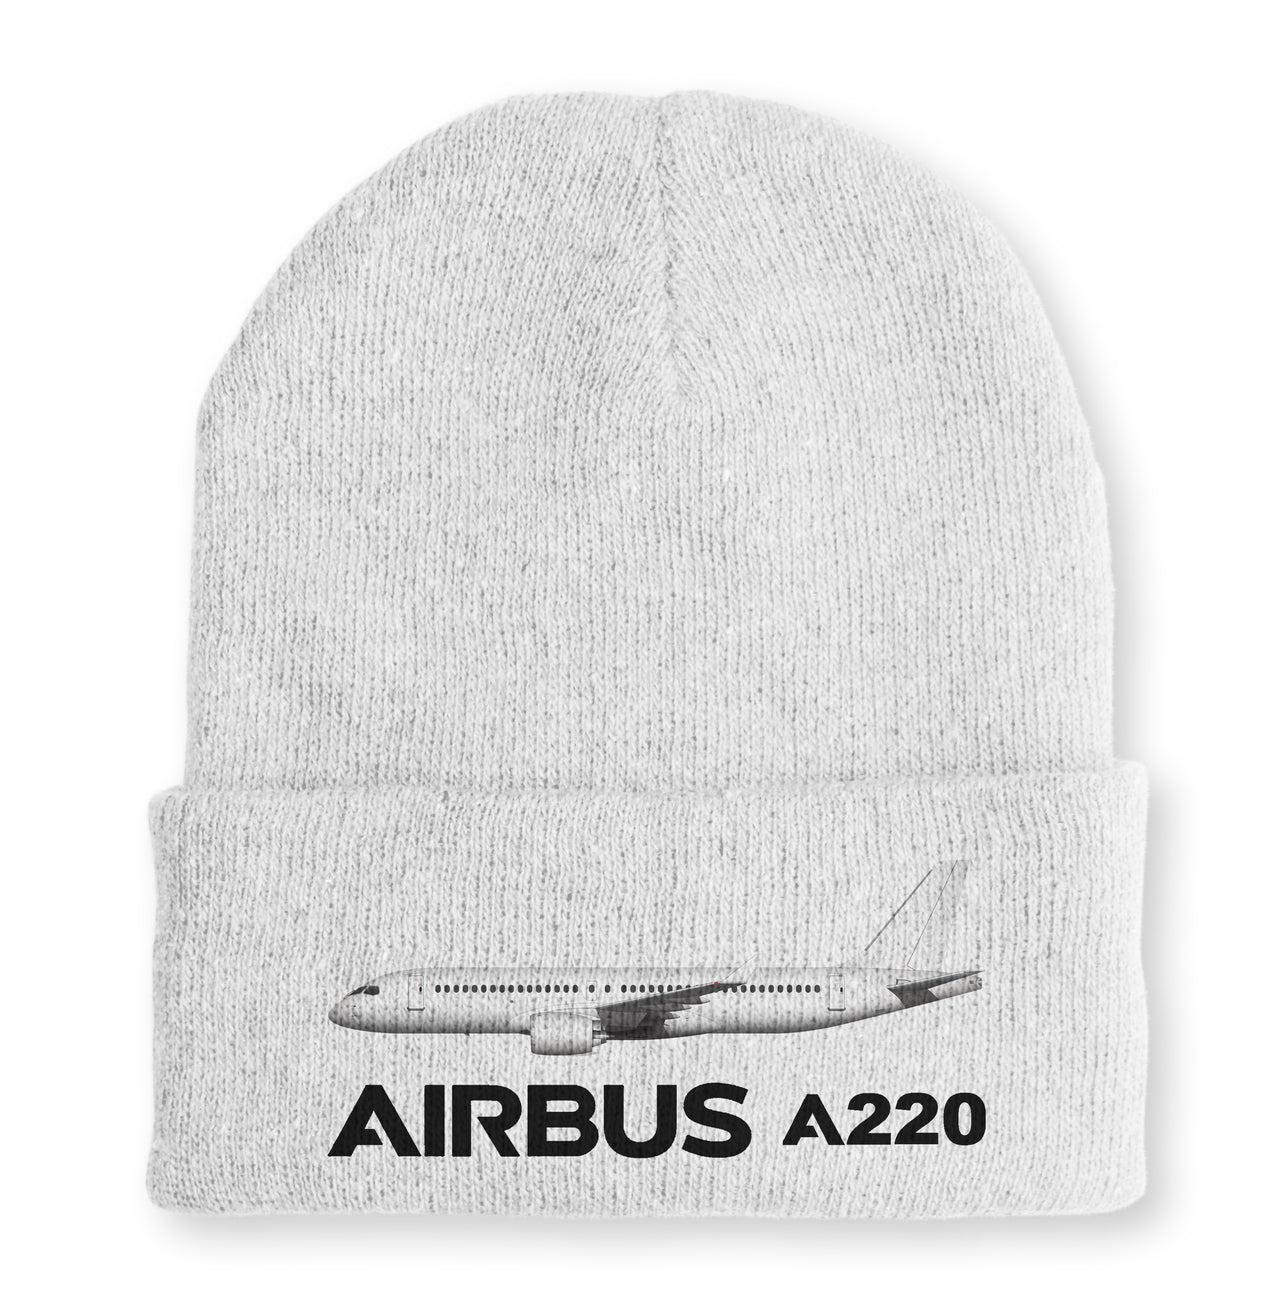 The Airbus A220 Embroidered Beanies